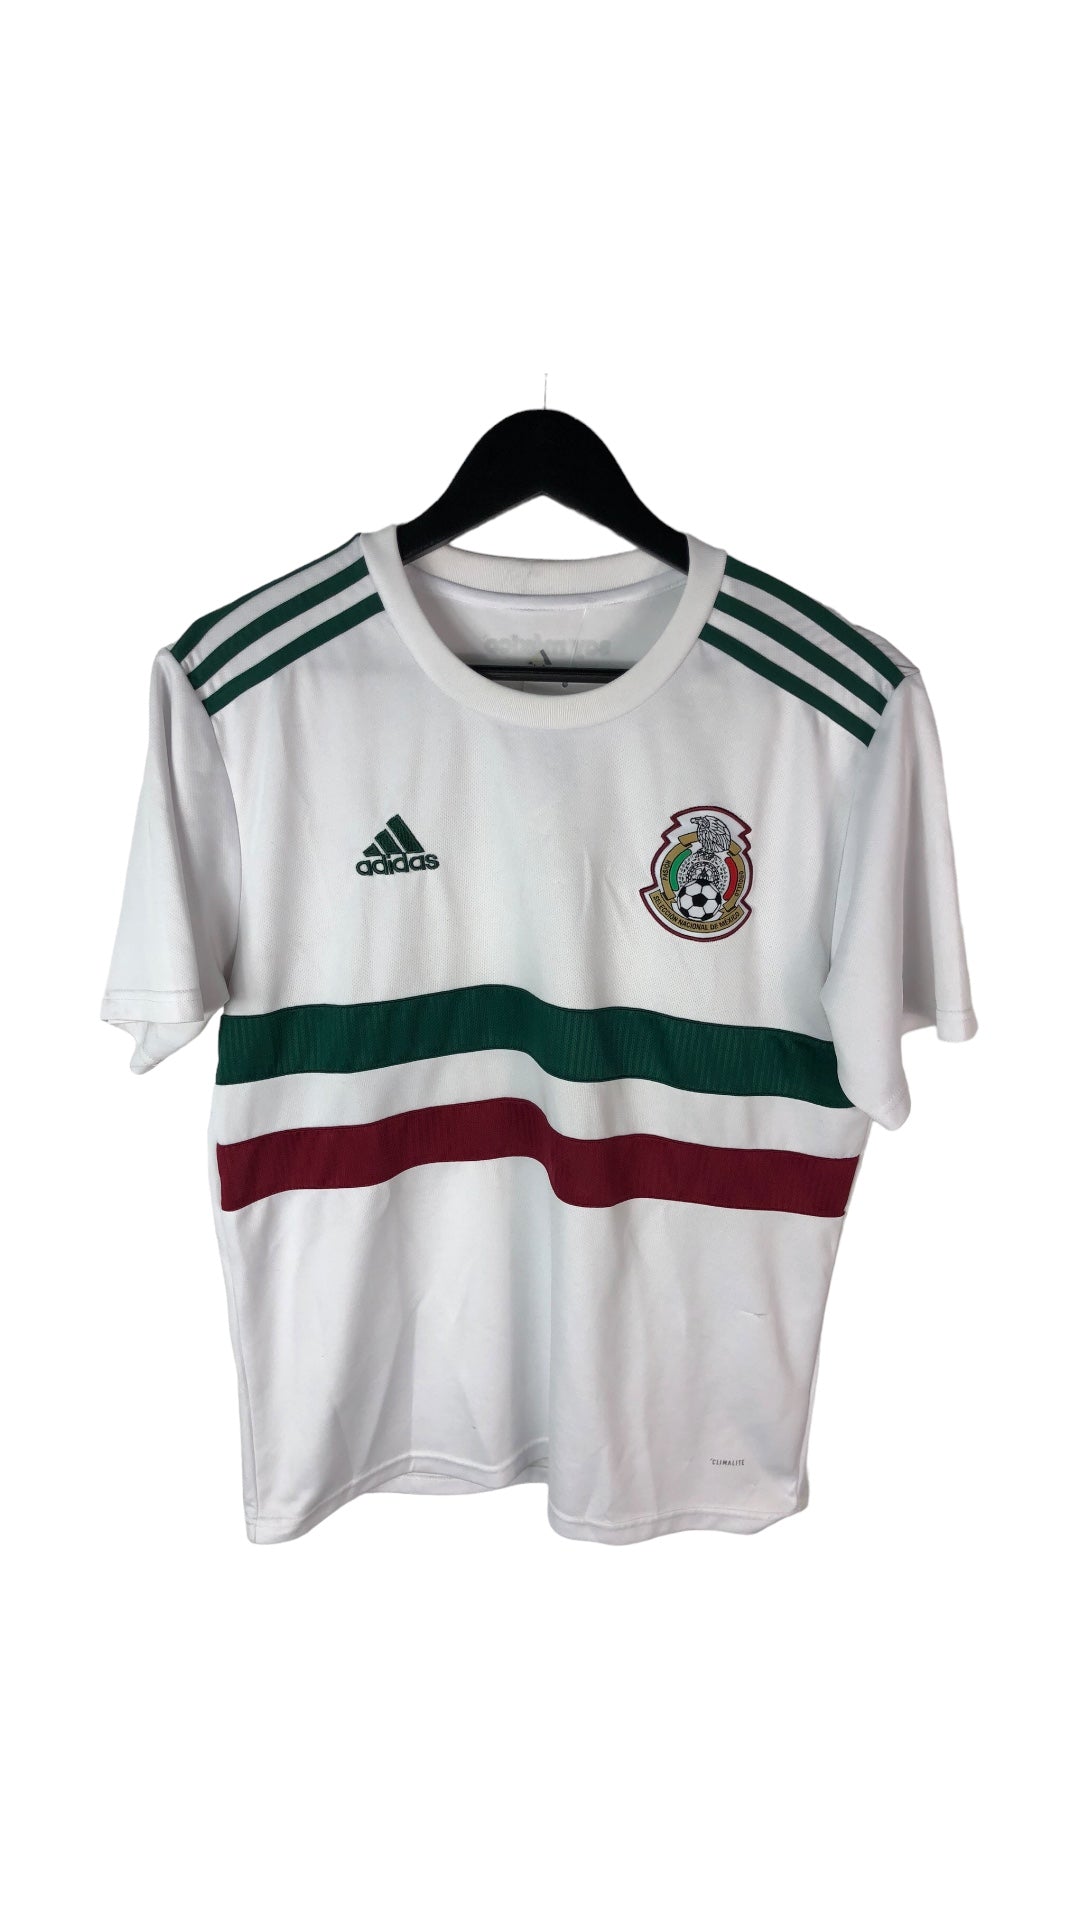 Adidas Mexico World Cup White Away Soccer Jersey Sz M